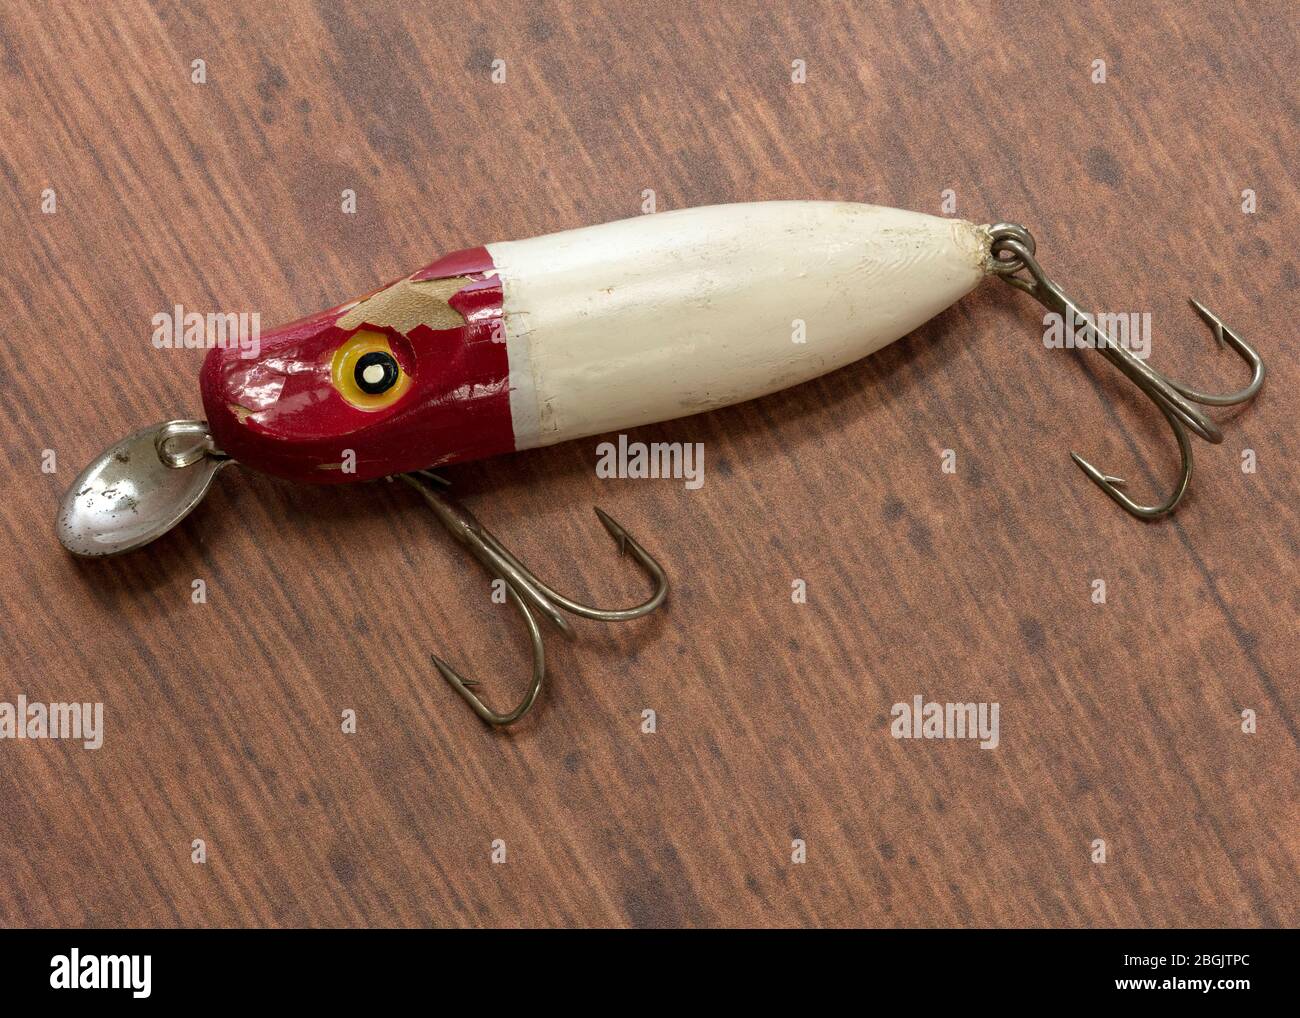 Antique bass-fishing lure, by James D Coppinger/Dembinsky Photo Assoc Stock Photo